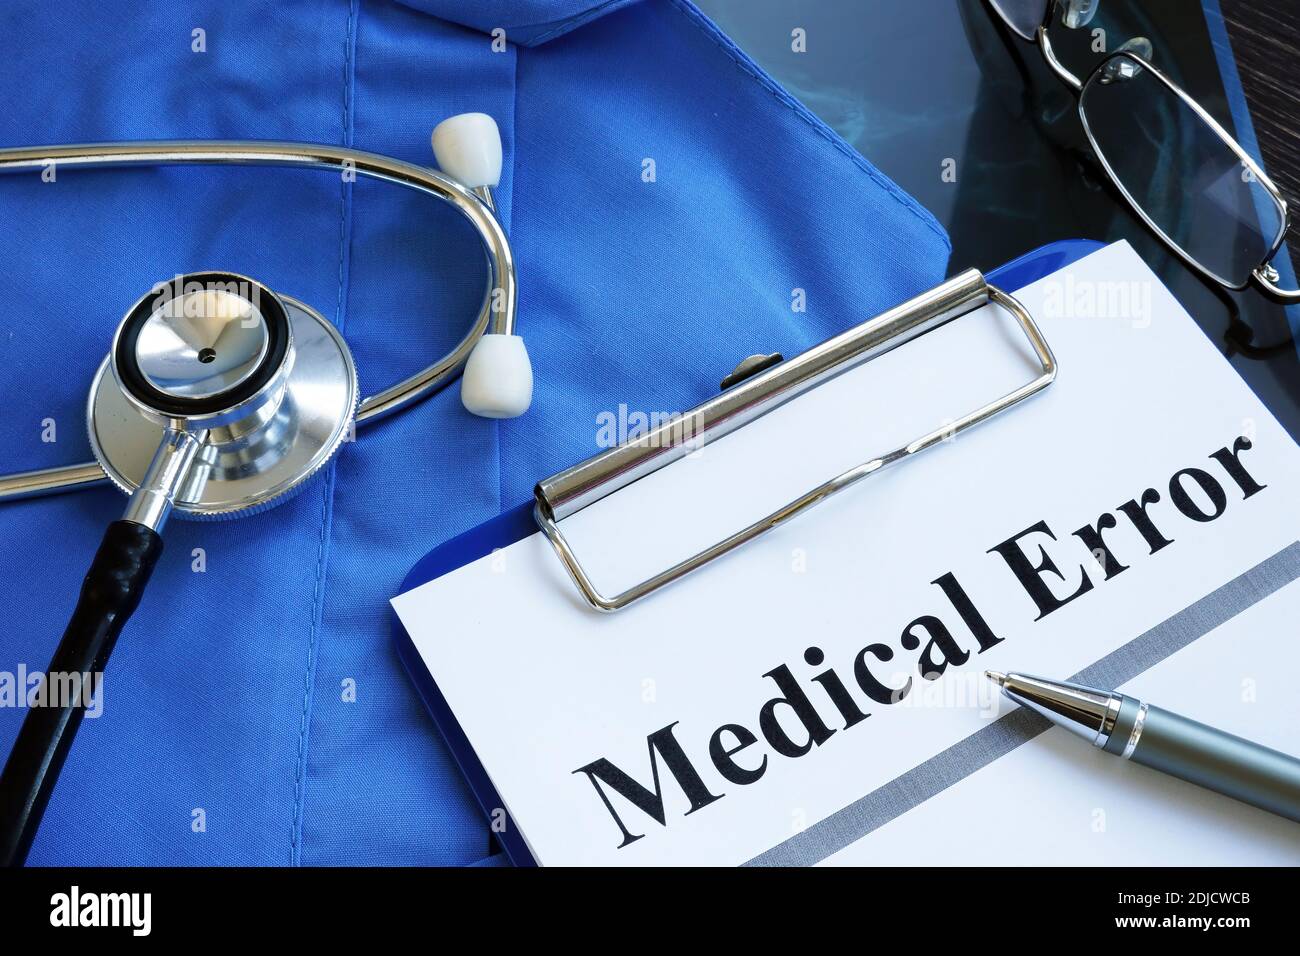 Medical error report with stethoscope and doctor robe. Stock Photo